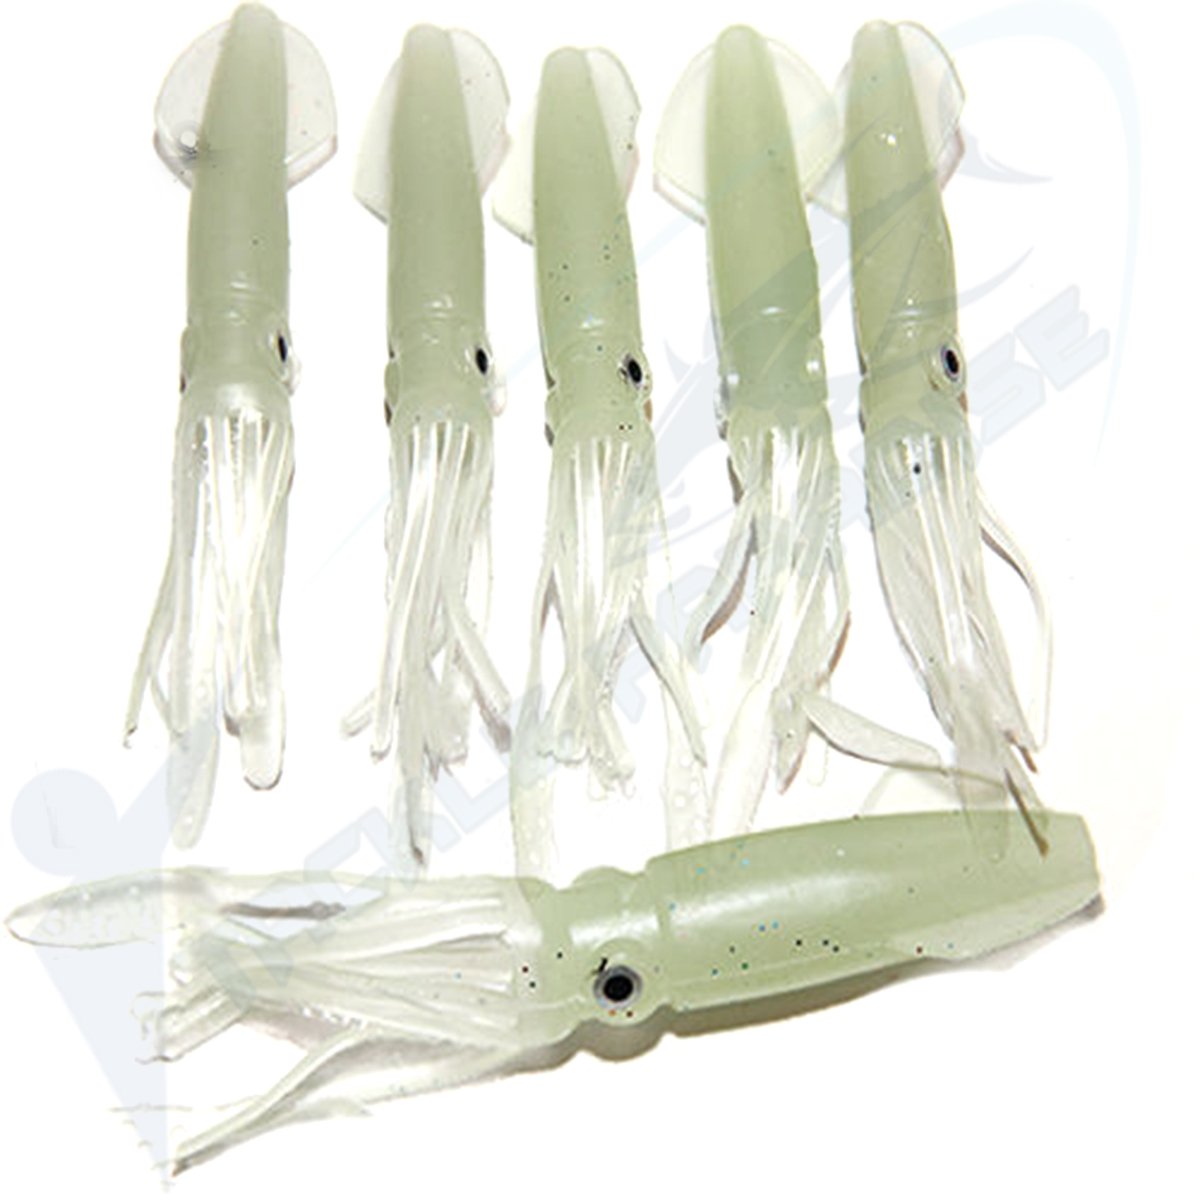 Squid Lure, Glow in The Dark Squid Bait Soft Hollow Design Flexible  Lifelike for Fishpond